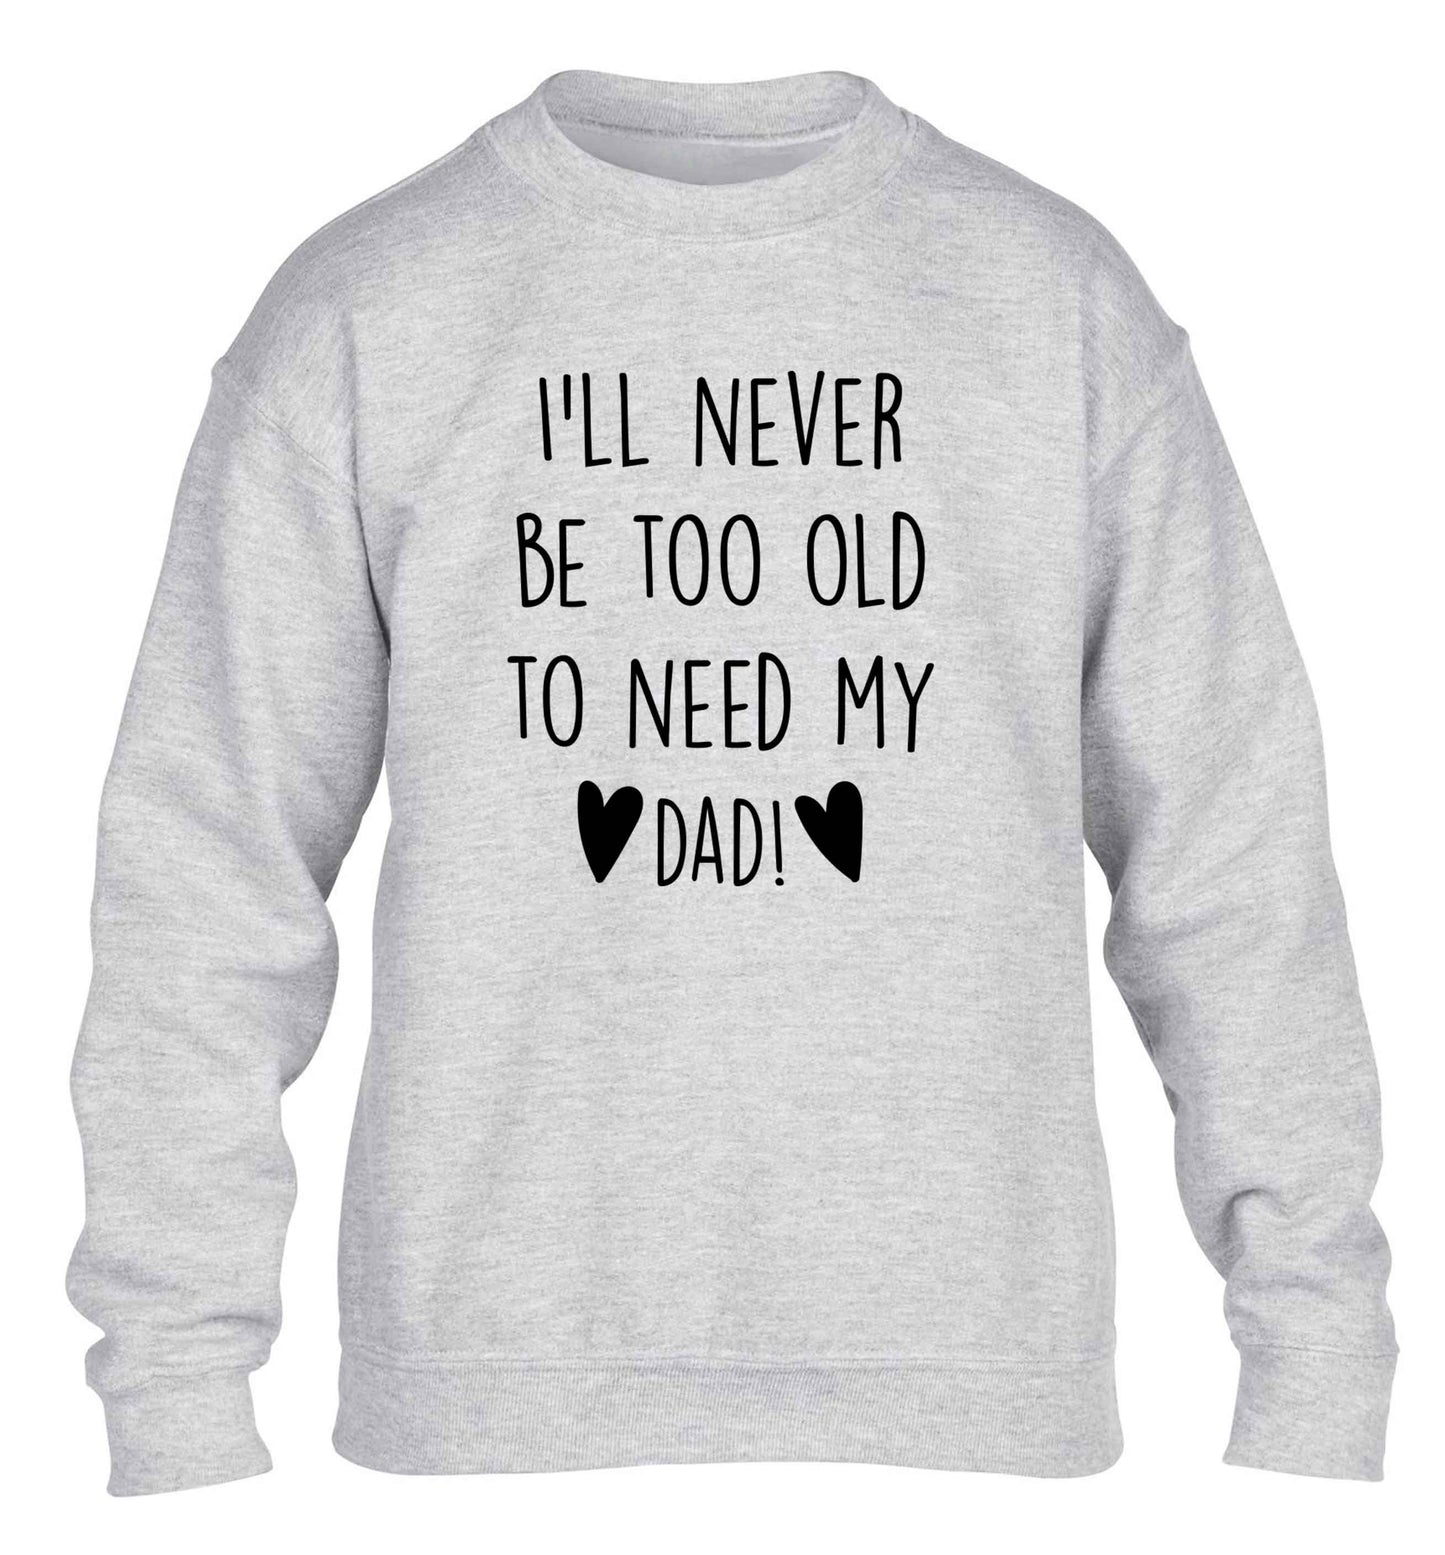 I'll never be too old to need my dad children's grey sweater 12-13 Years